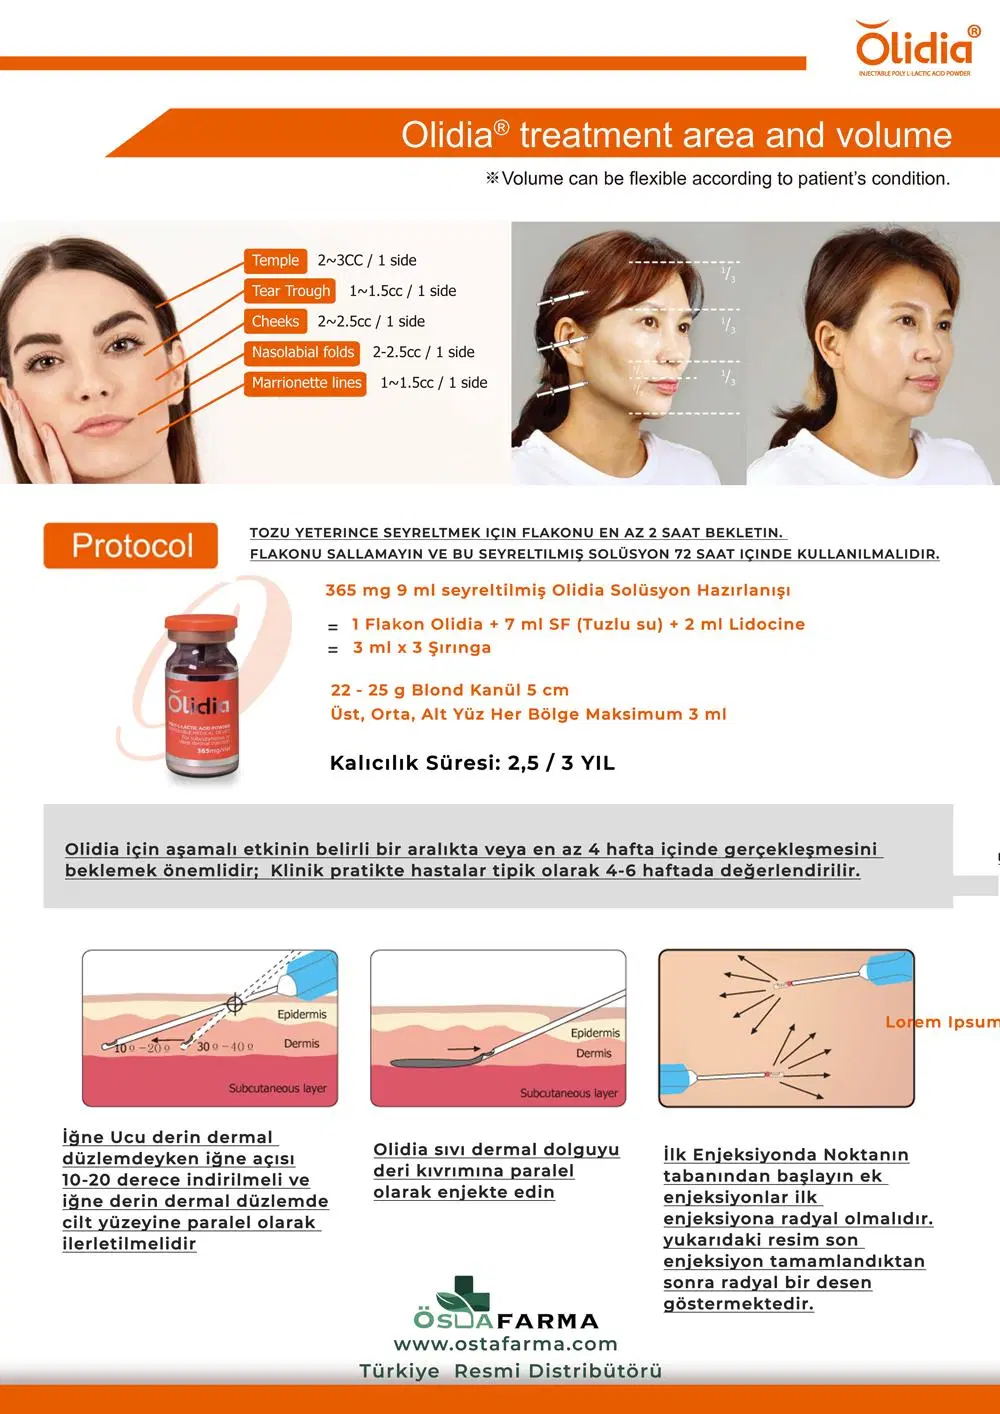 Le Ciel Rosy Plla Filler (CE) Royal Rejubeau Stylish Le Ciel Rosy Is a Medical Device for Treating Severe Facial Wrinkle